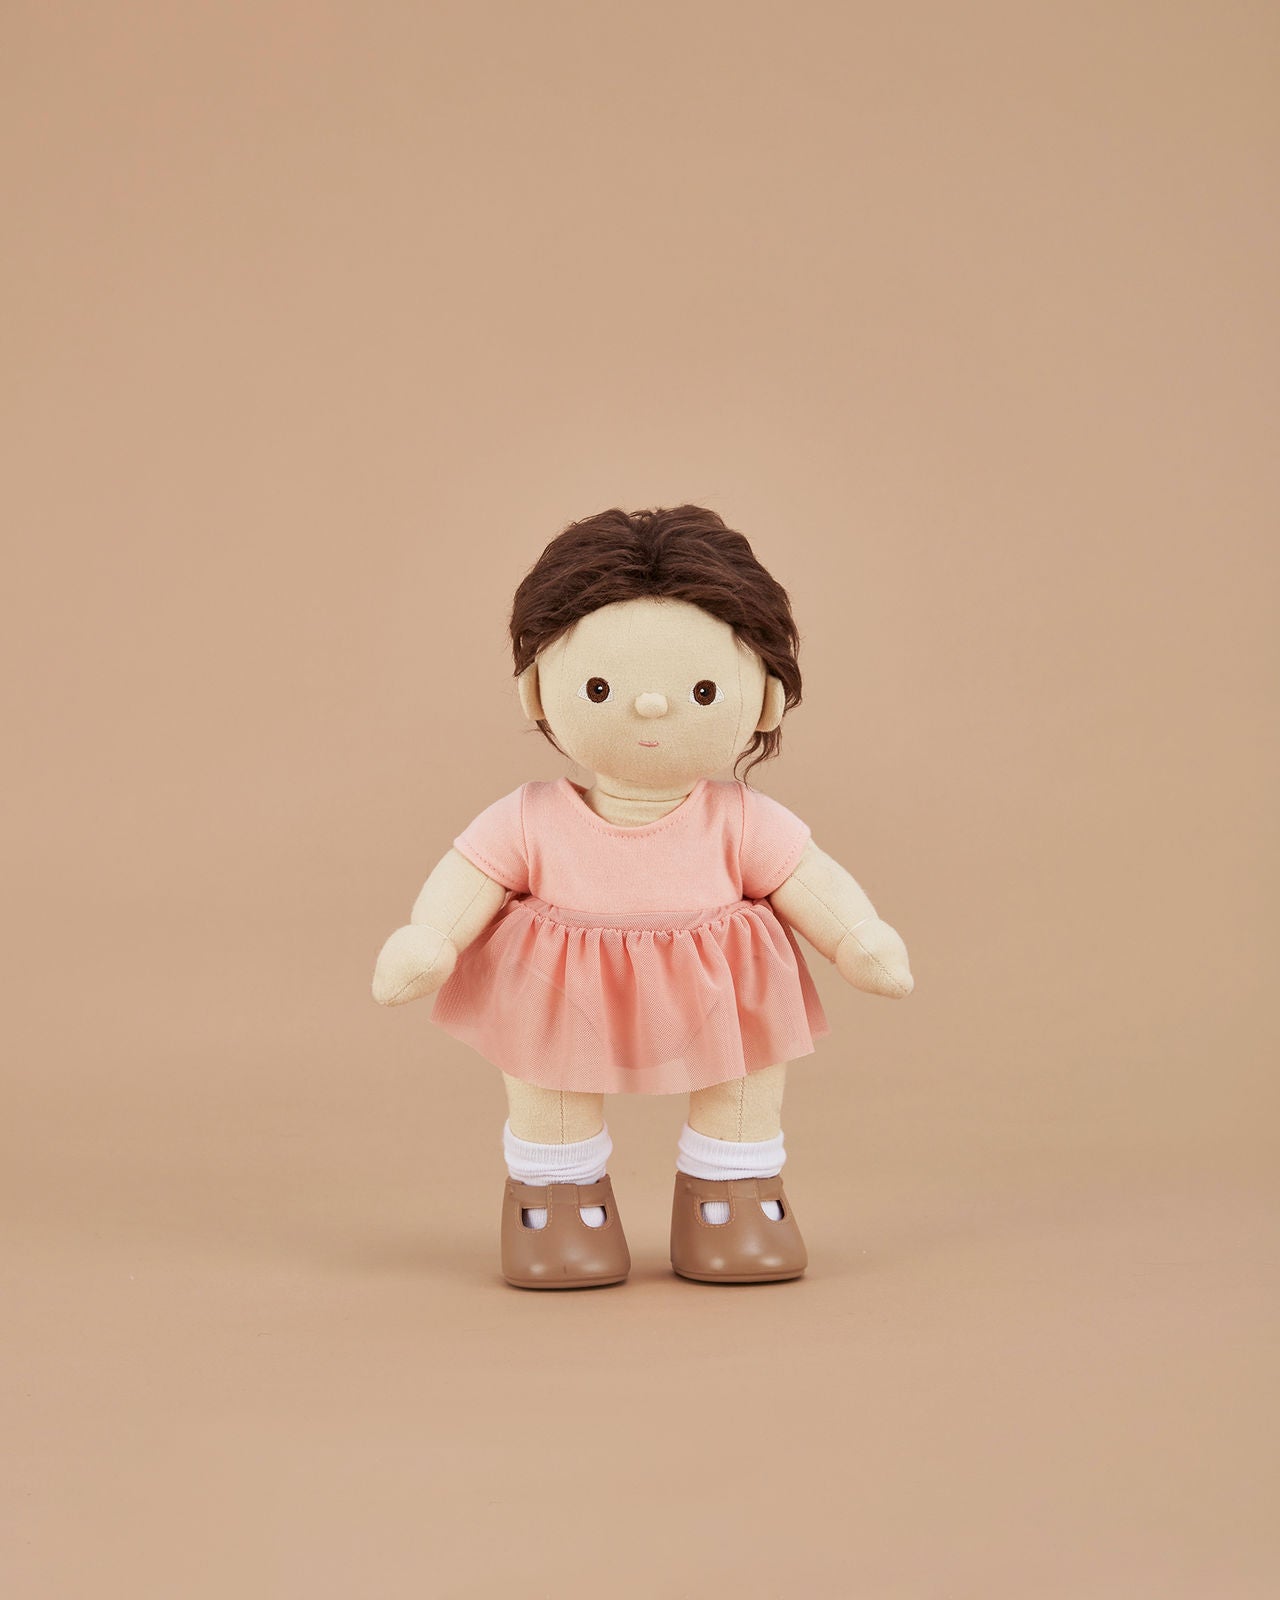 Your little one will love dressing up their Dinkum Doll in the Olli Ella Dinkum Doll Ballet Set